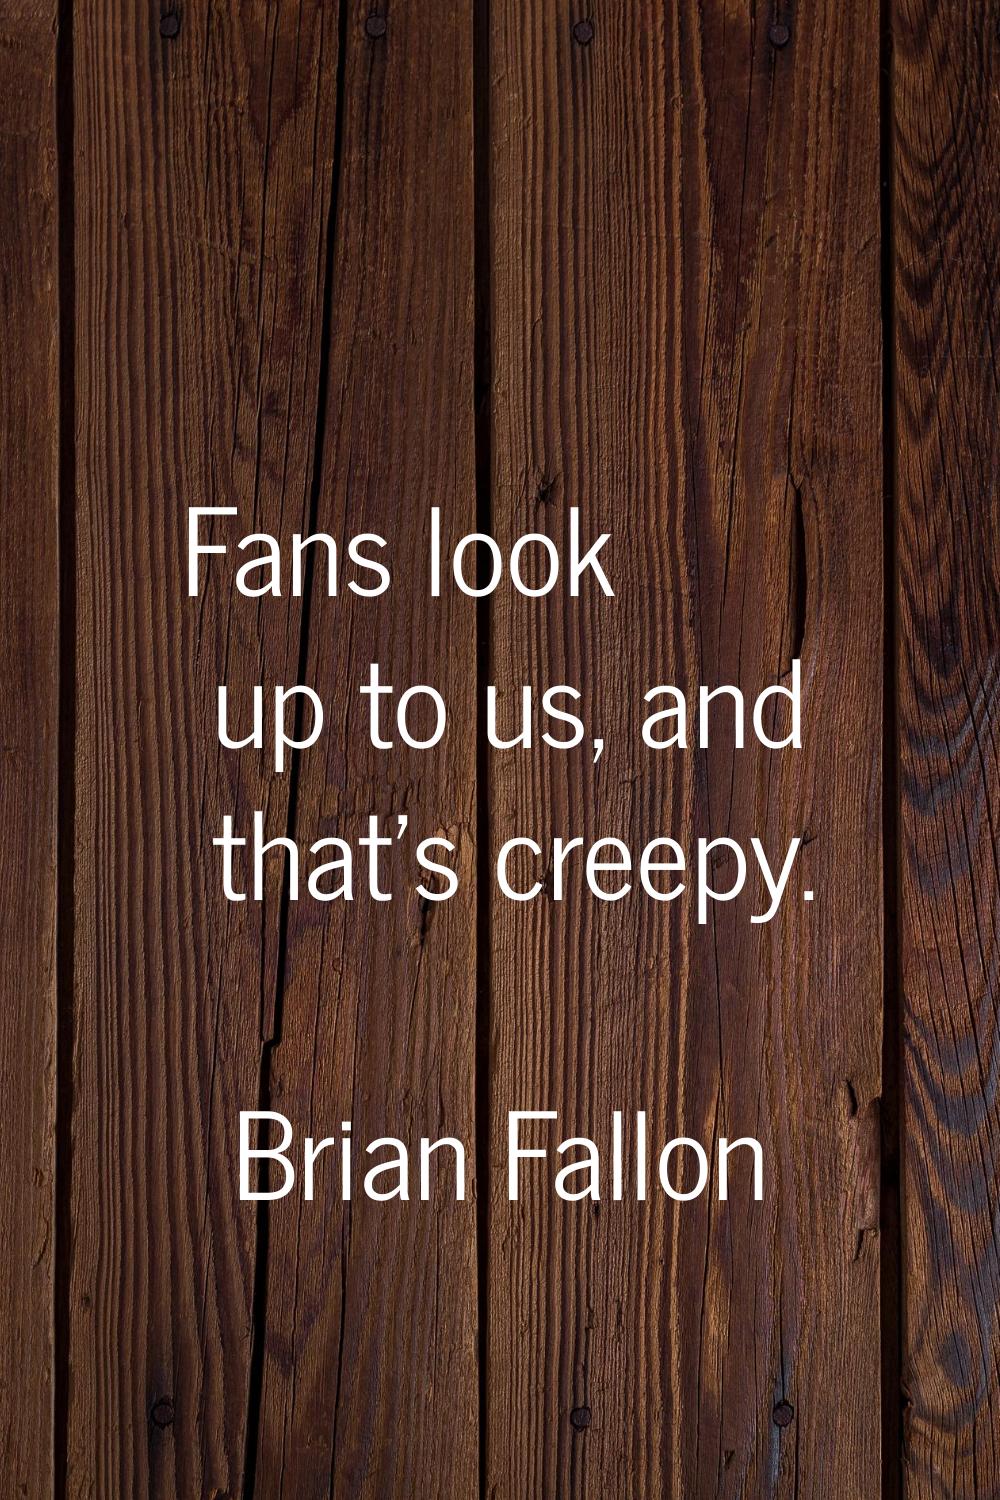 Fans look up to us, and that's creepy.